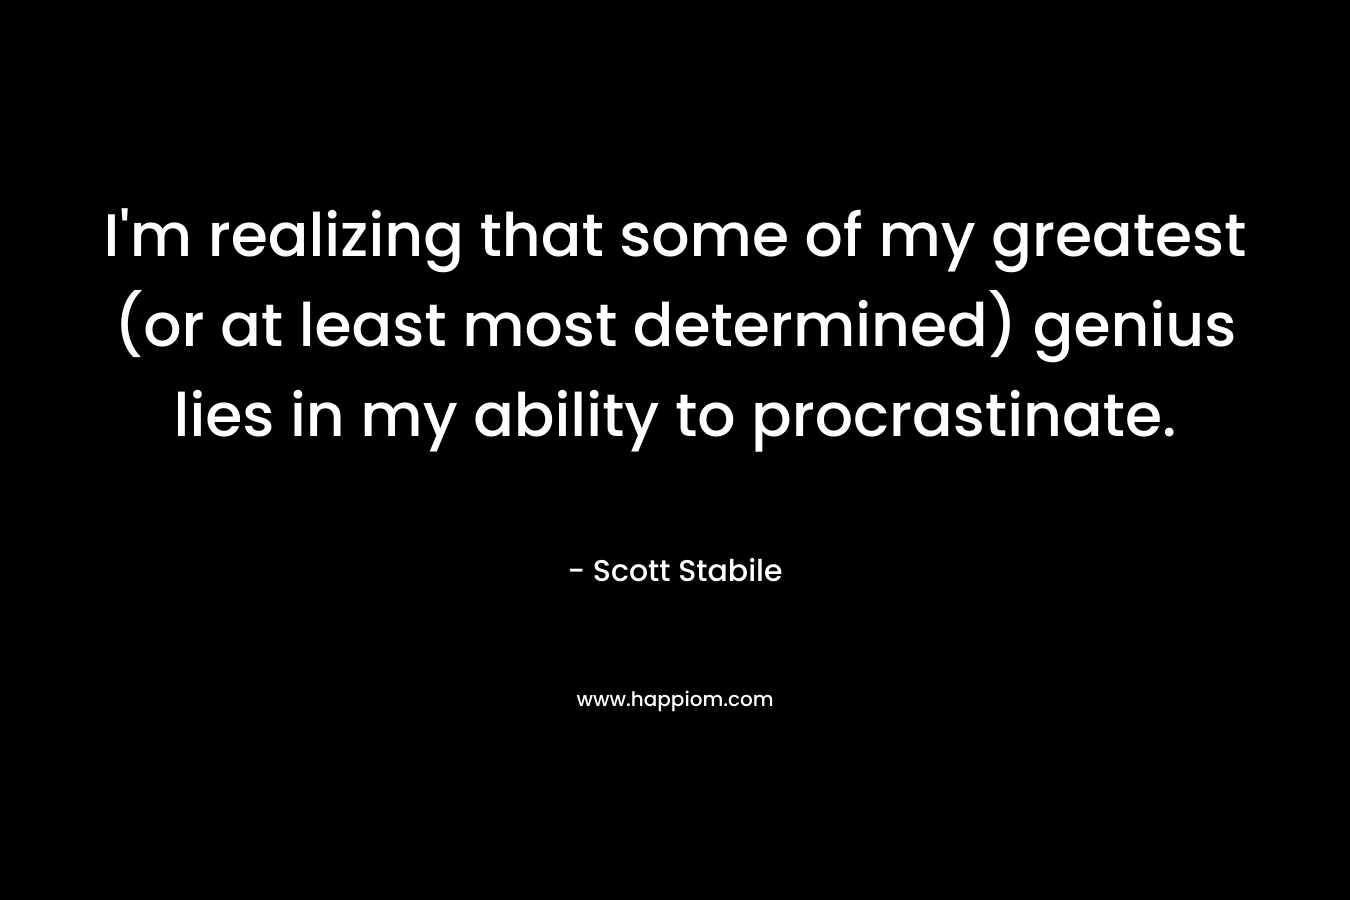 I'm realizing that some of my greatest (or at least most determined) genius lies in my ability to procrastinate.